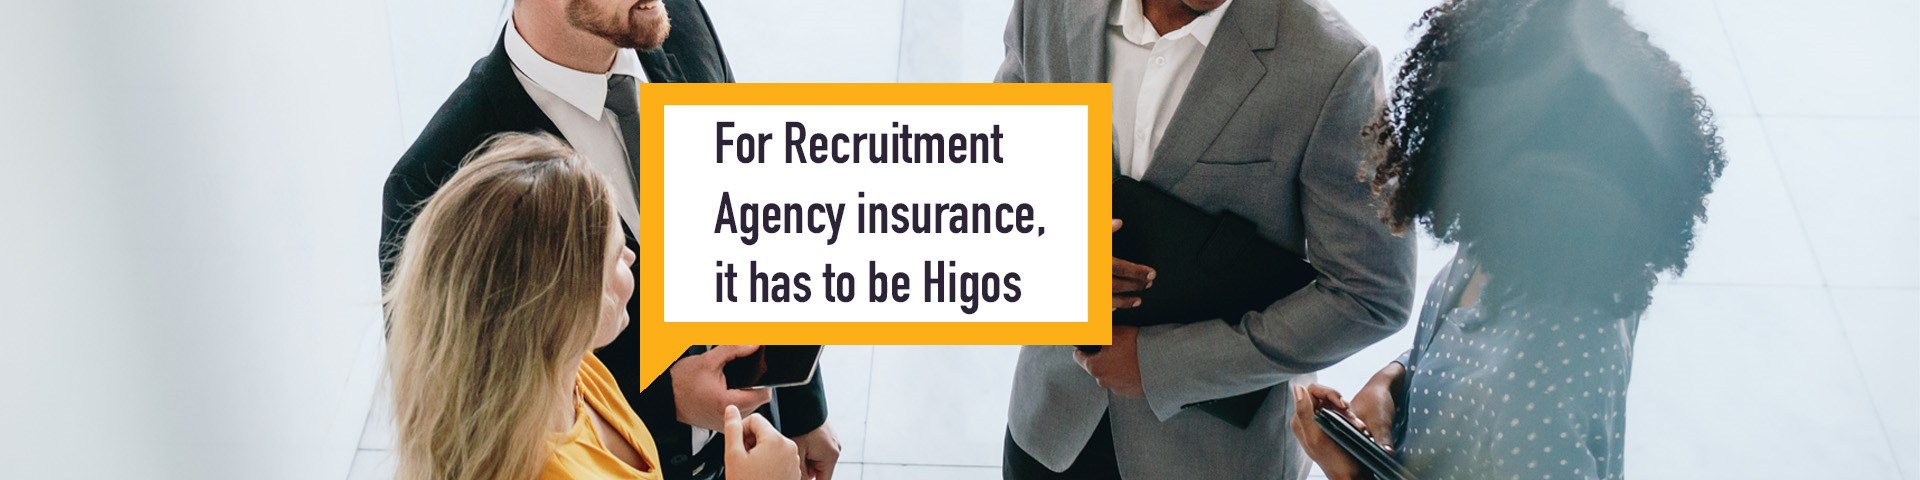 Small team of professionals talking with text overlay that reads ‘for recruitment agency insurance, it has to be Higos’